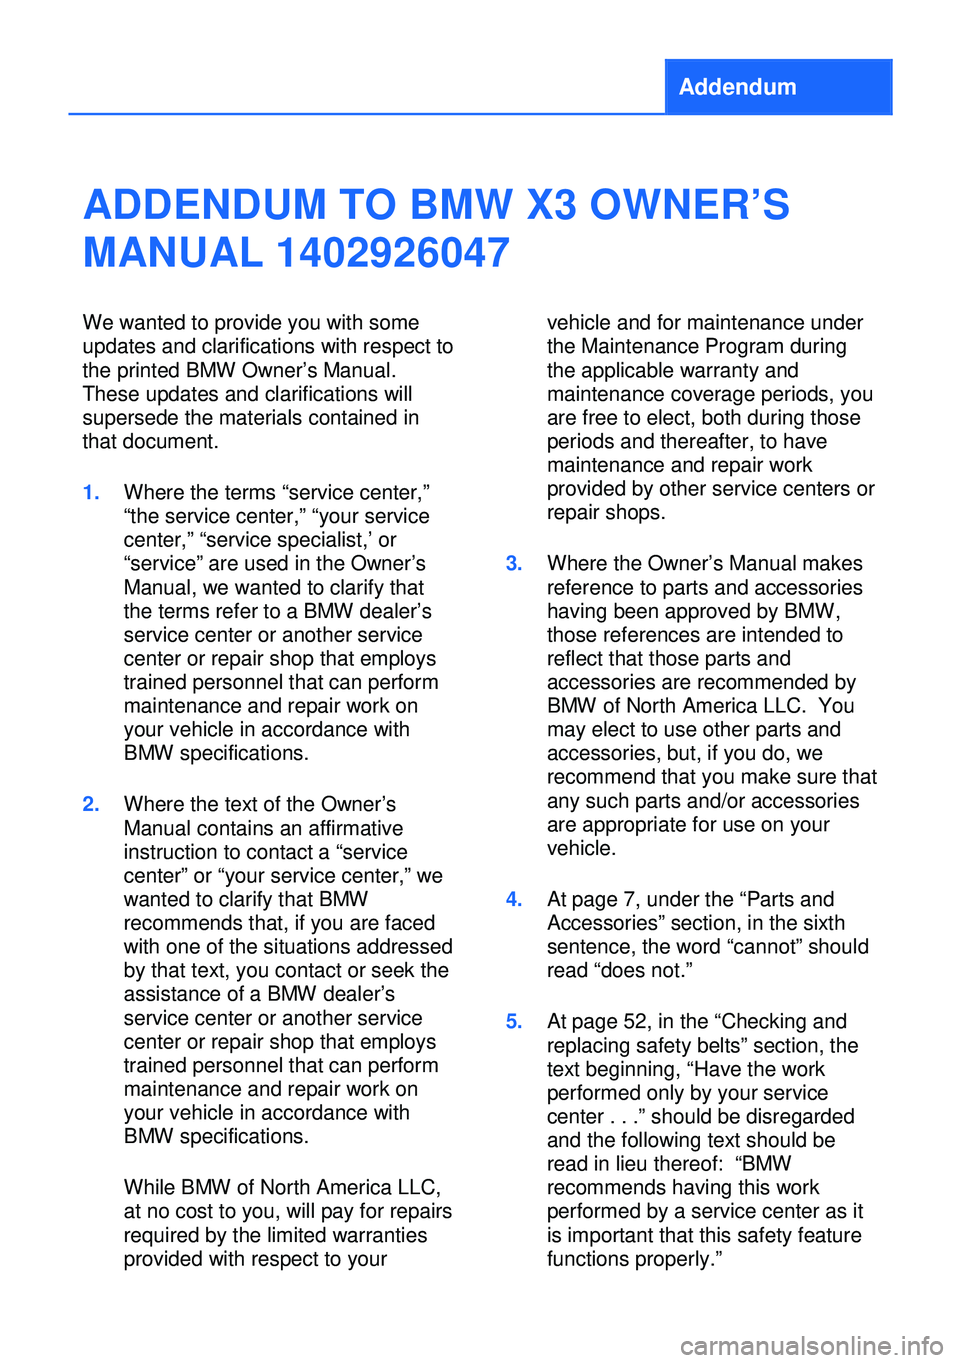 BMW X3 2013 F25 Owners Manual Addendum
ADDENDUM TO BMW X3 OWNER’S
MANUAL 1402926047
We wanted to provide you with some
updates and clarifications with respect to
the printed BMW Owner’s Manual.
These updates and clarifications